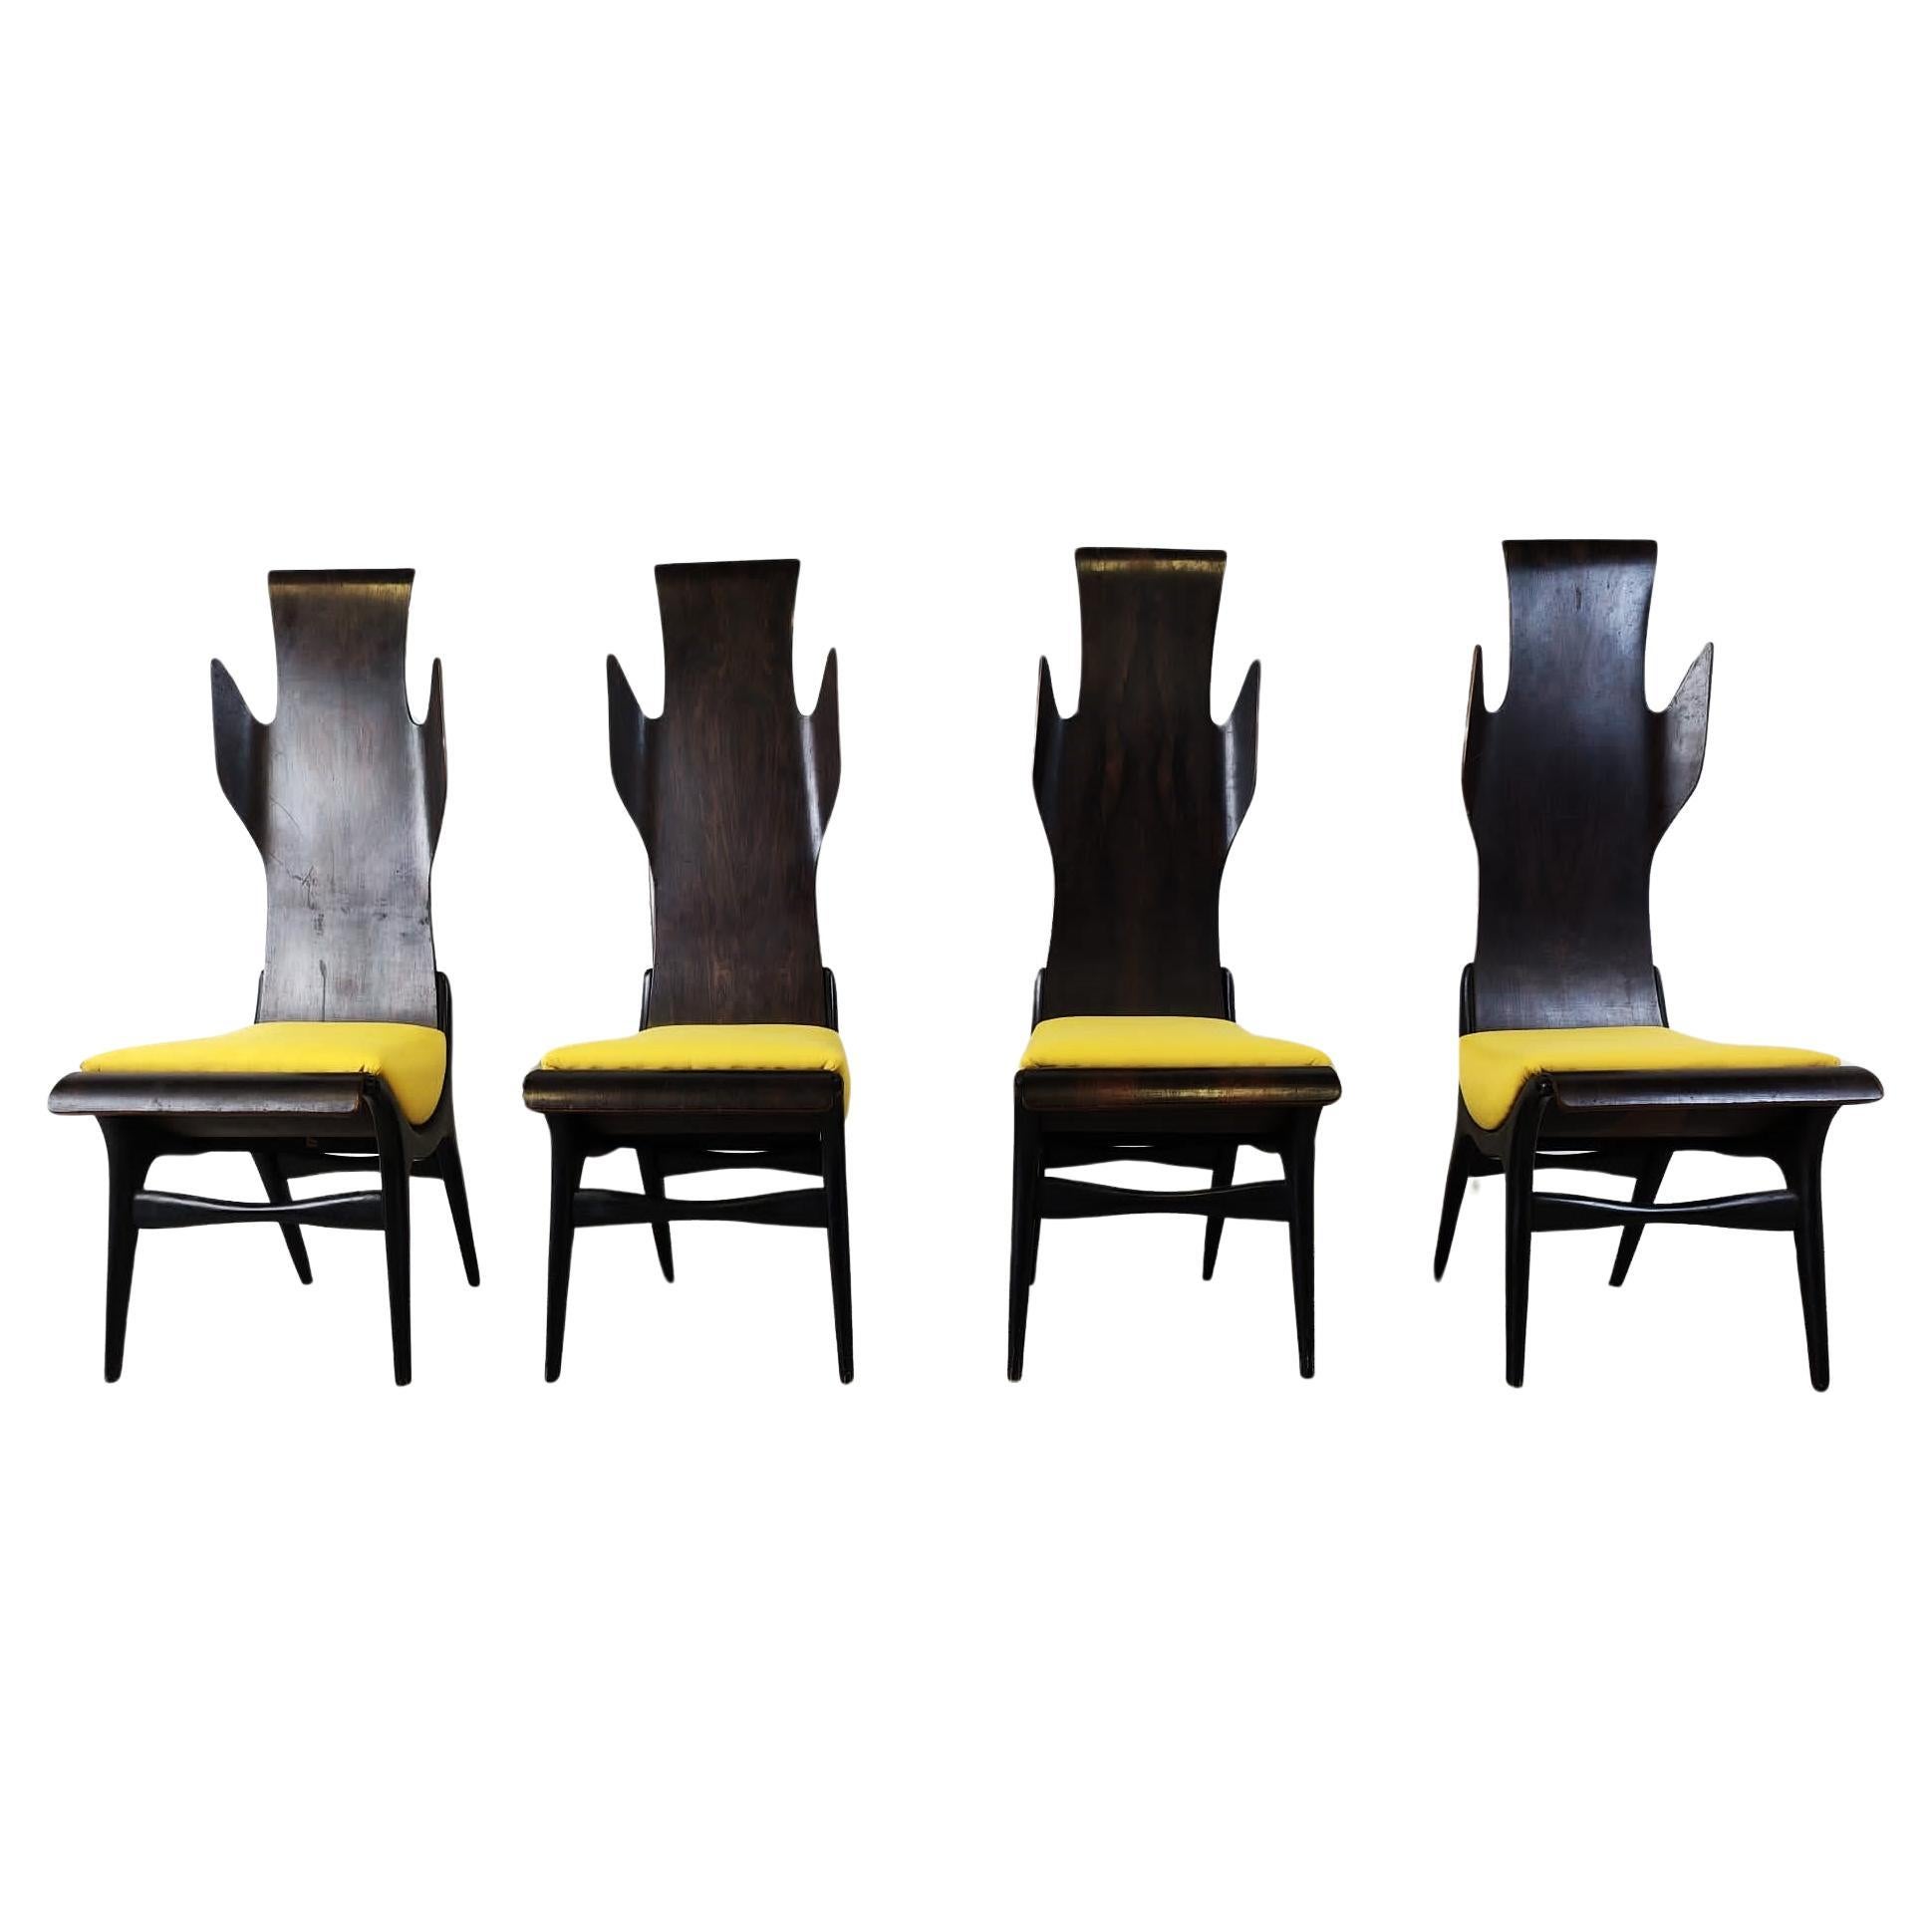 Mid century high back flame dining chairs by Dante Latorre, 1950s